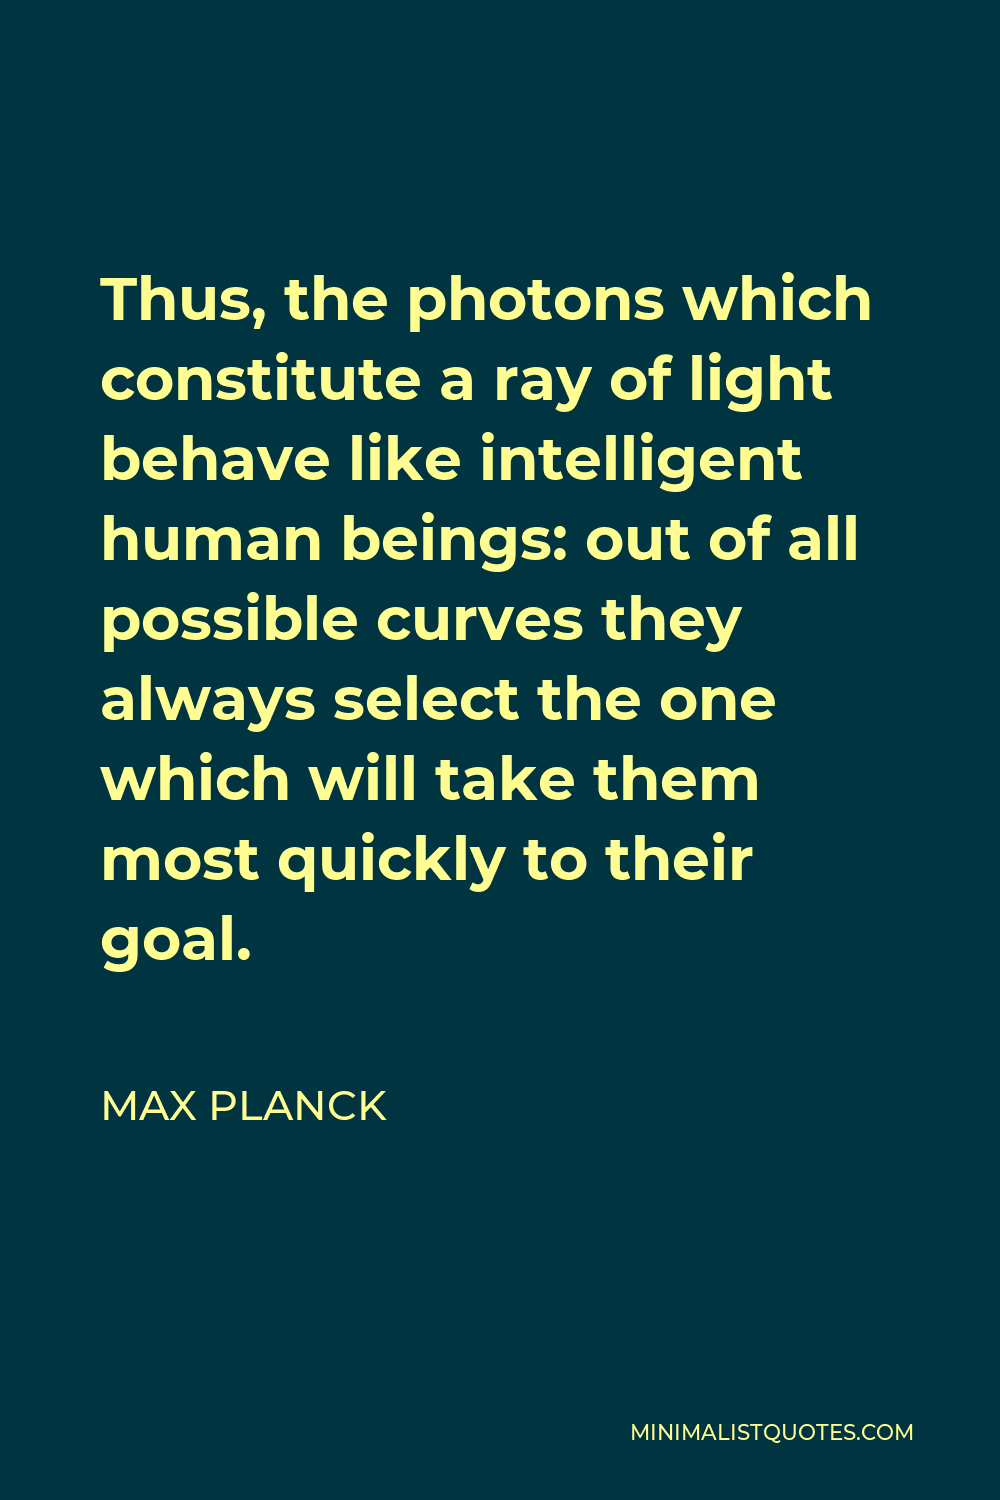 Max Planck Quote - Thus, the photons which constitute a ray of light behave like intelligent human beings: out of all possible curves they always select the one which will take them most quickly to their goal.